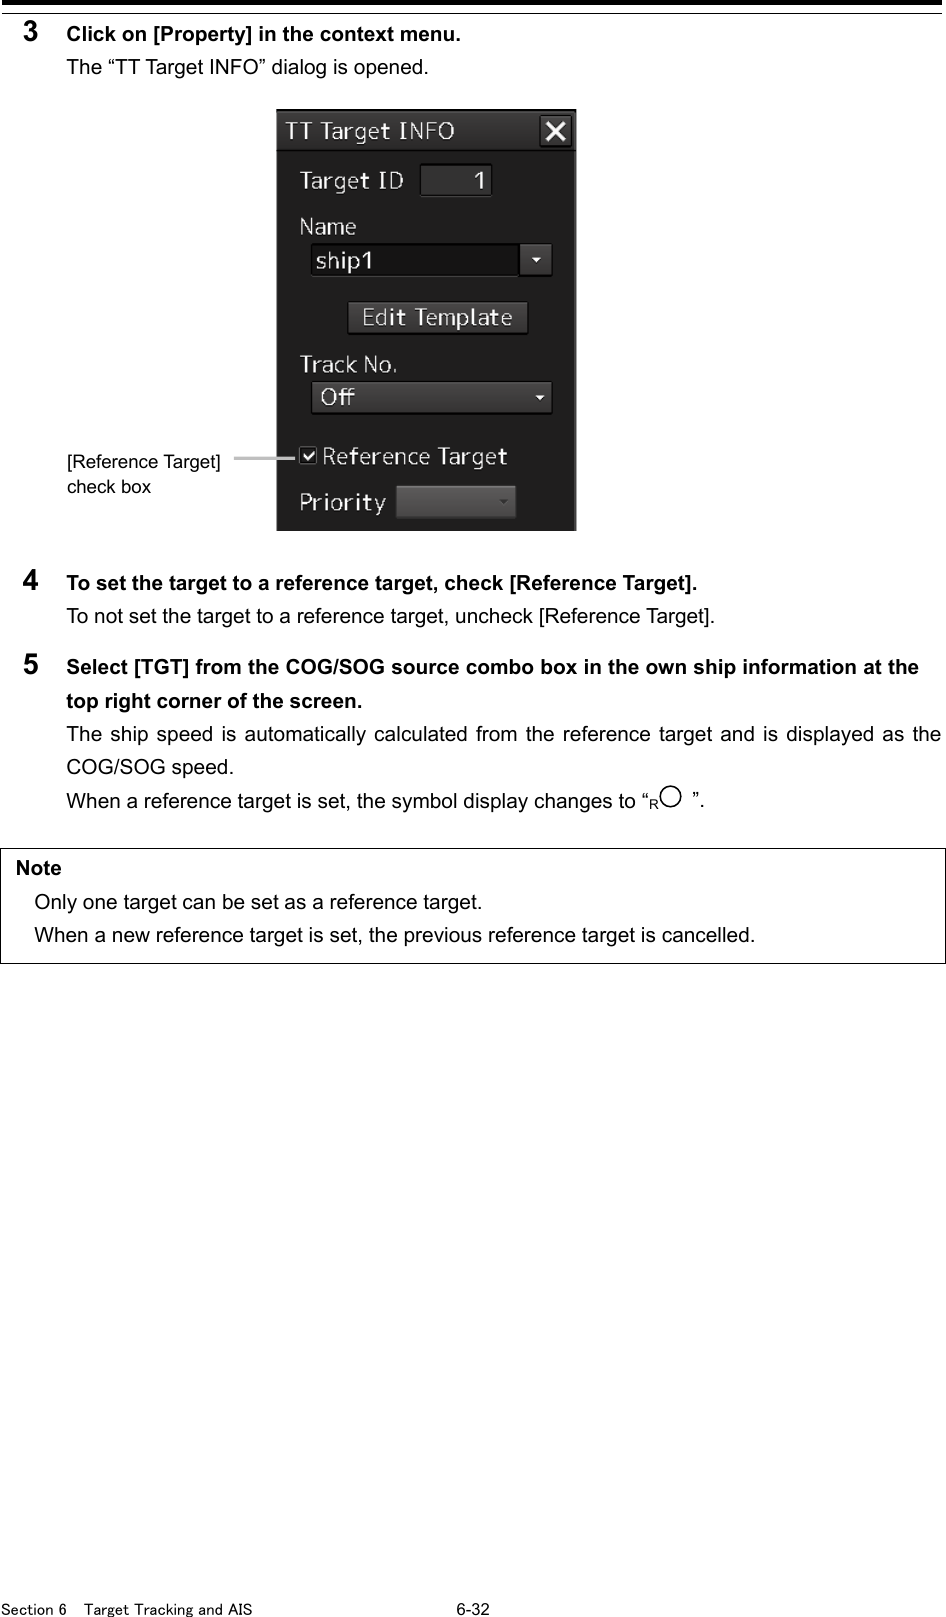  Section 6  Target Tracking and AIS 6-32 3  Click on [Property] in the context menu. The “TT Target INFO” dialog is opened.   4  To set the target to a reference target, check [Reference Target]. To not set the target to a reference target, uncheck [Reference Target]. 5  Select [TGT] from the COG/SOG source combo box in the own ship information at the top right corner of the screen. The ship speed is automatically calculated from the reference target and is displayed as the COG/SOG speed. When a reference target is set, the symbol display changes to “R ”.  Note Only one target can be set as a reference target. When a new reference target is set, the previous reference target is cancelled.    [Reference Target] check box 